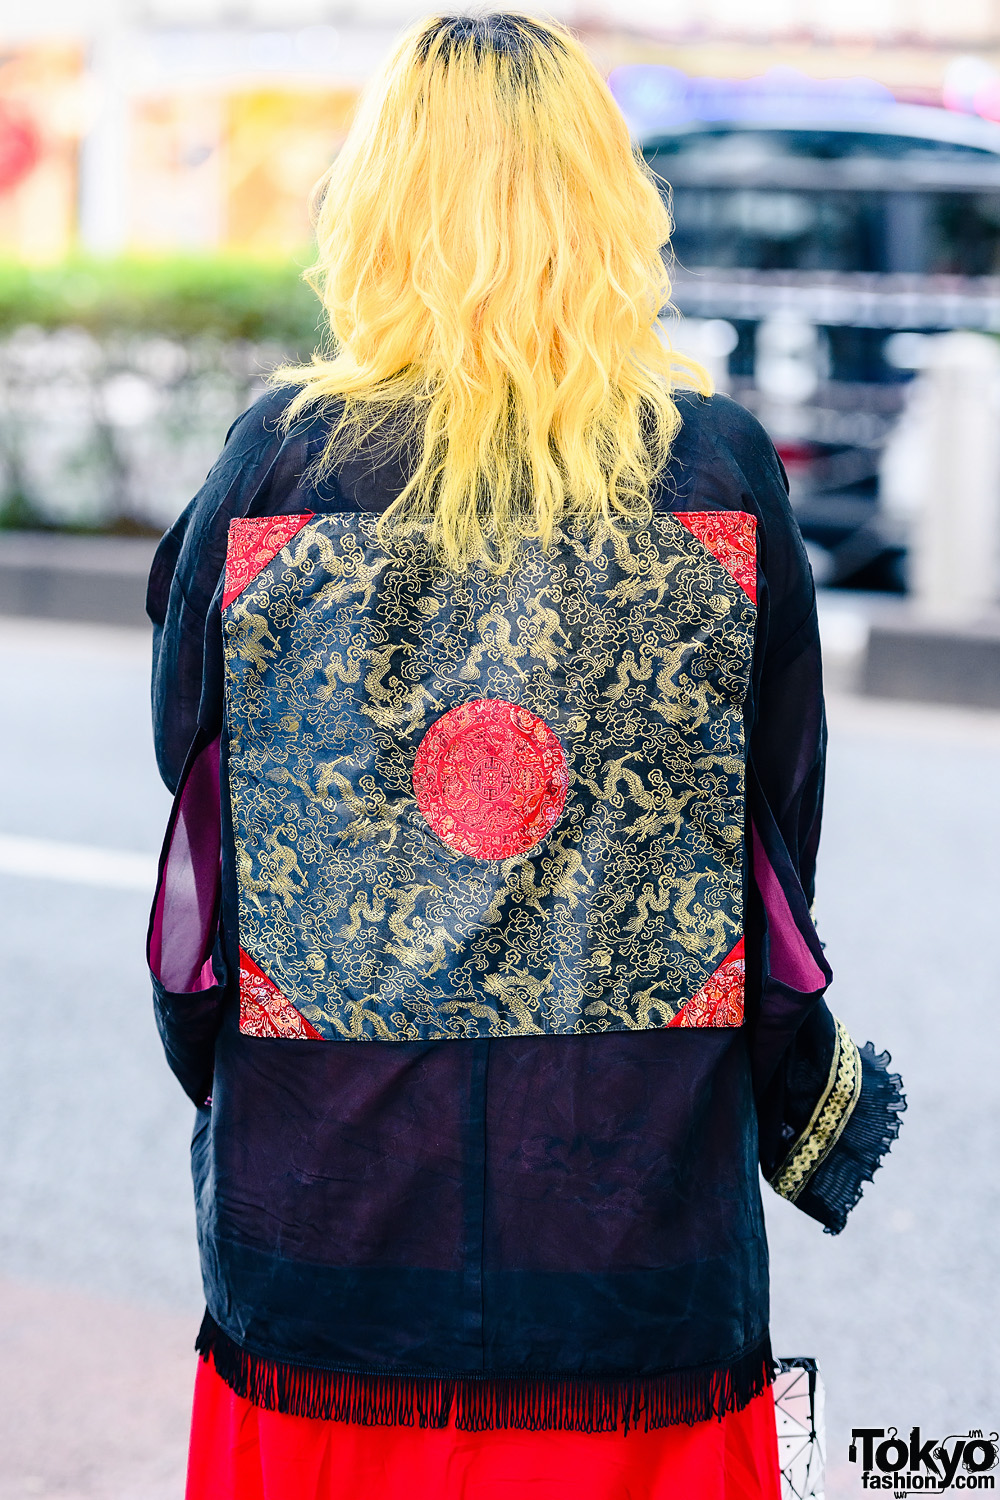 Sushi Shop Staffer's Eclectic Street Style w/ Yellow Hair, Painted